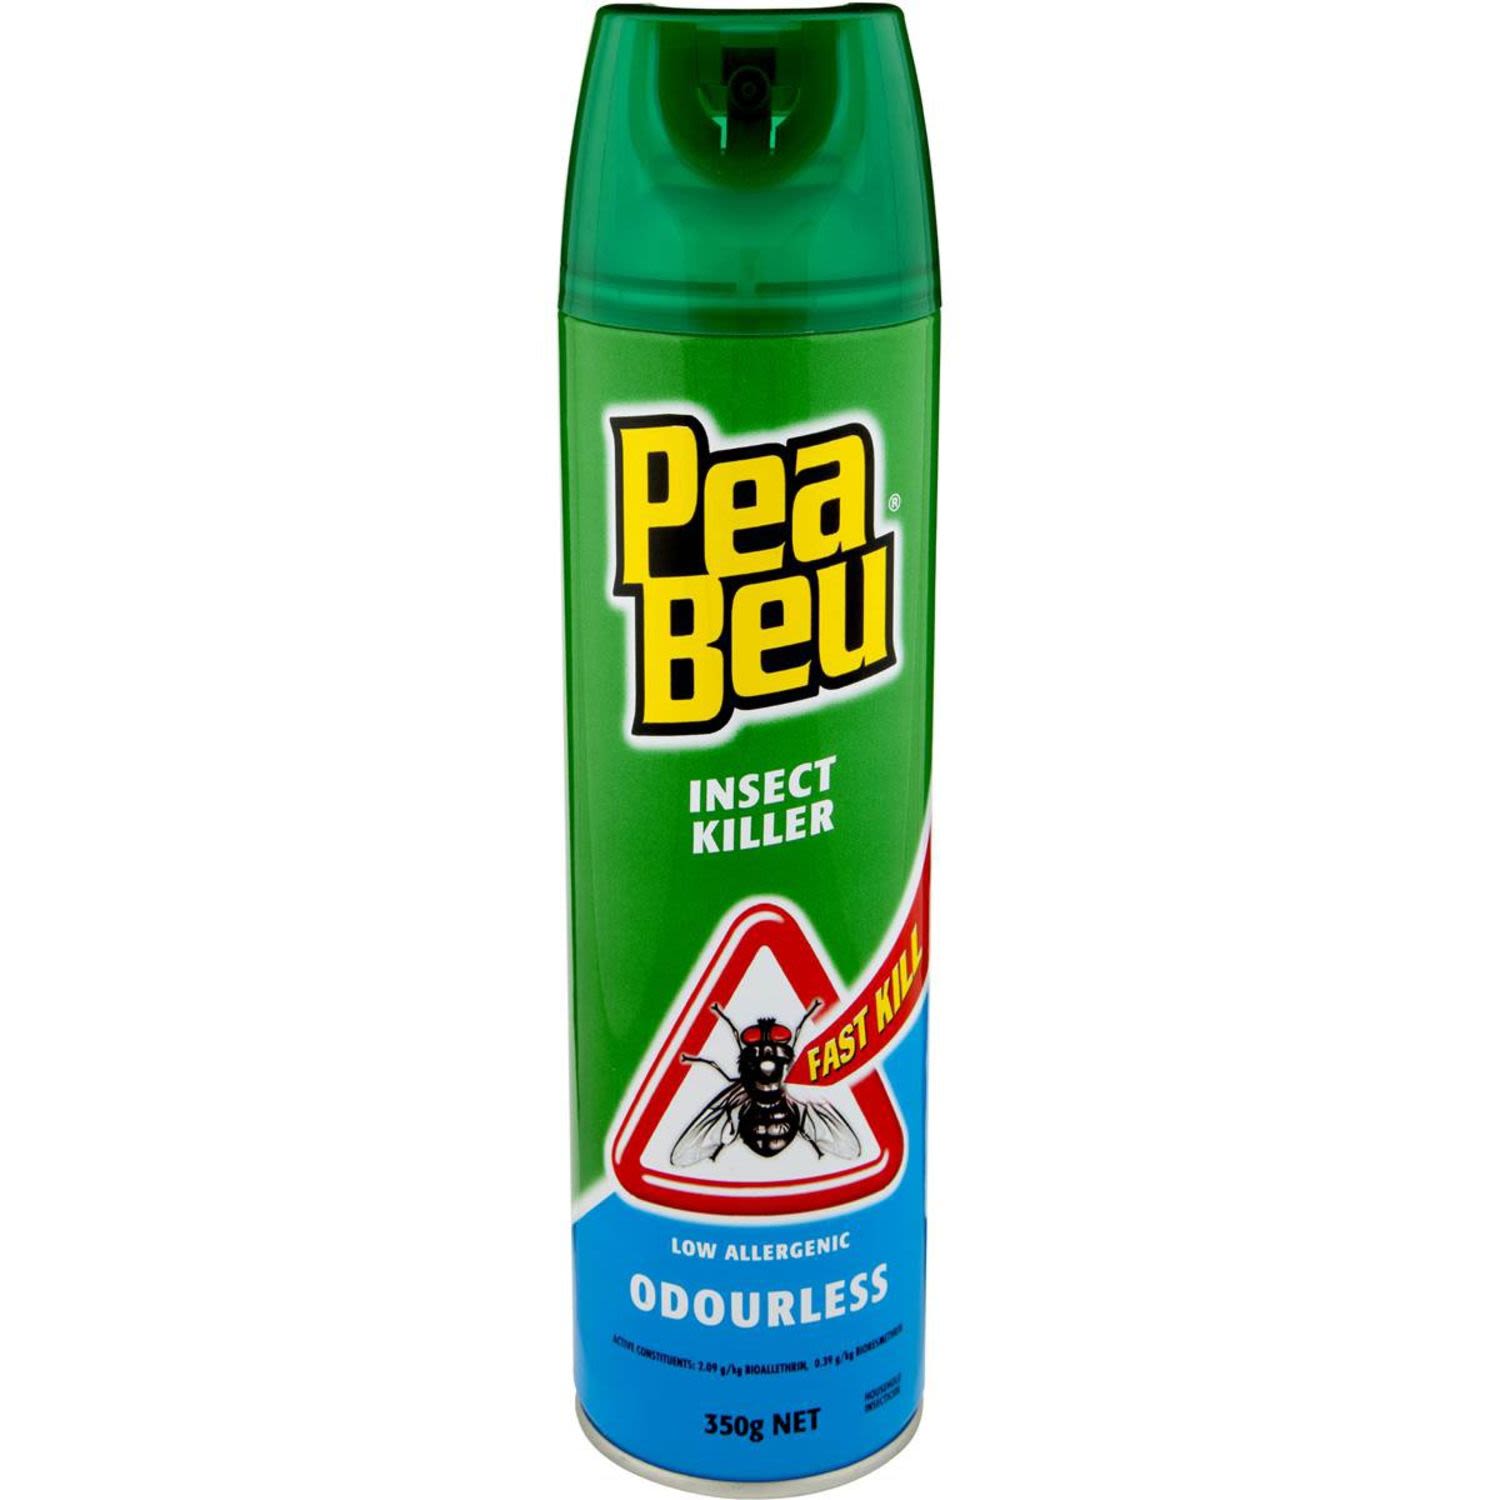 Pea Beu Fast Killing Insect Spray Odourless, 350 Gram